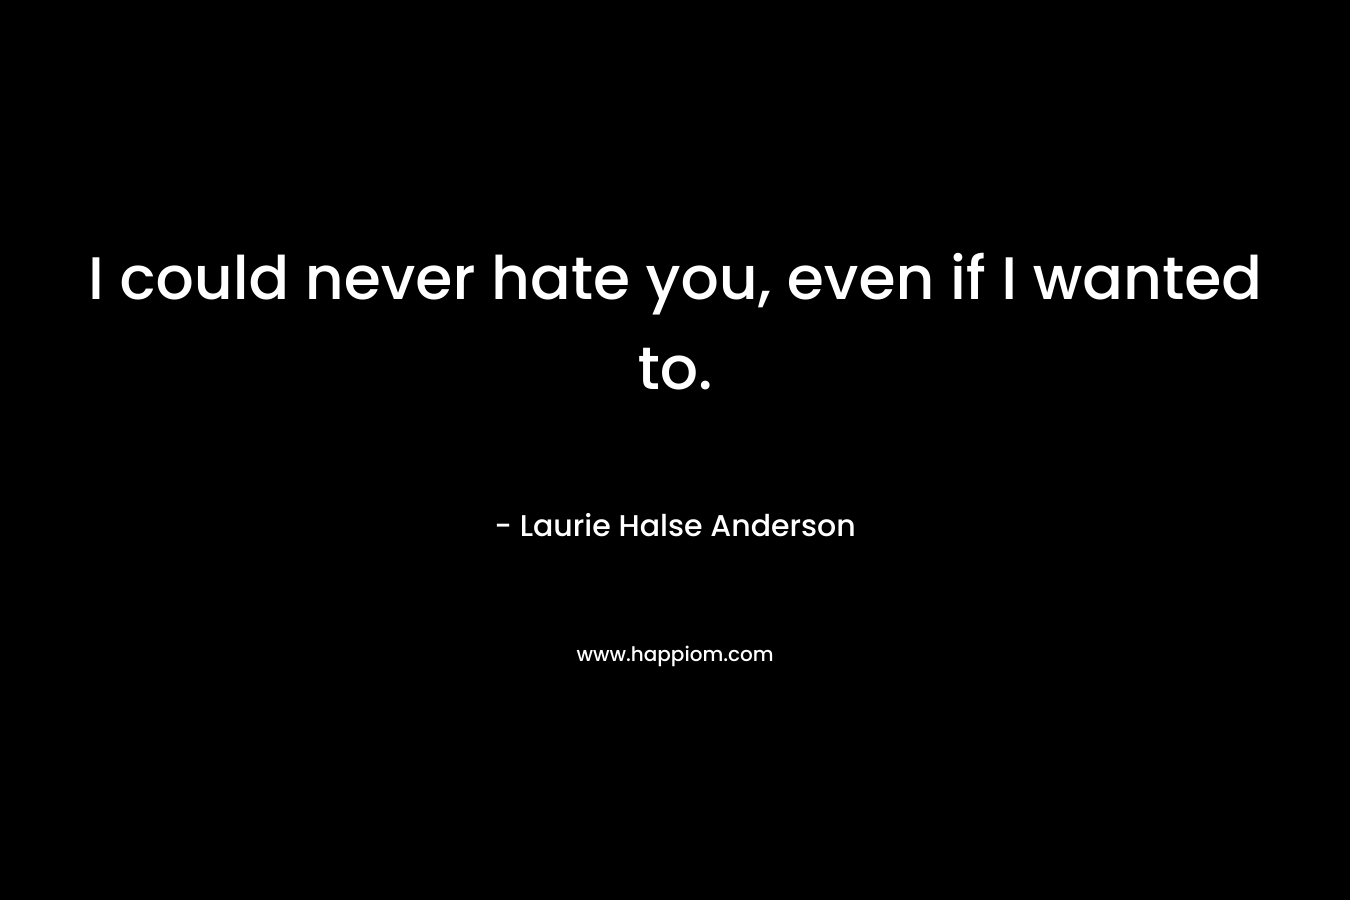 I could never hate you, even if I wanted to. – Laurie Halse Anderson